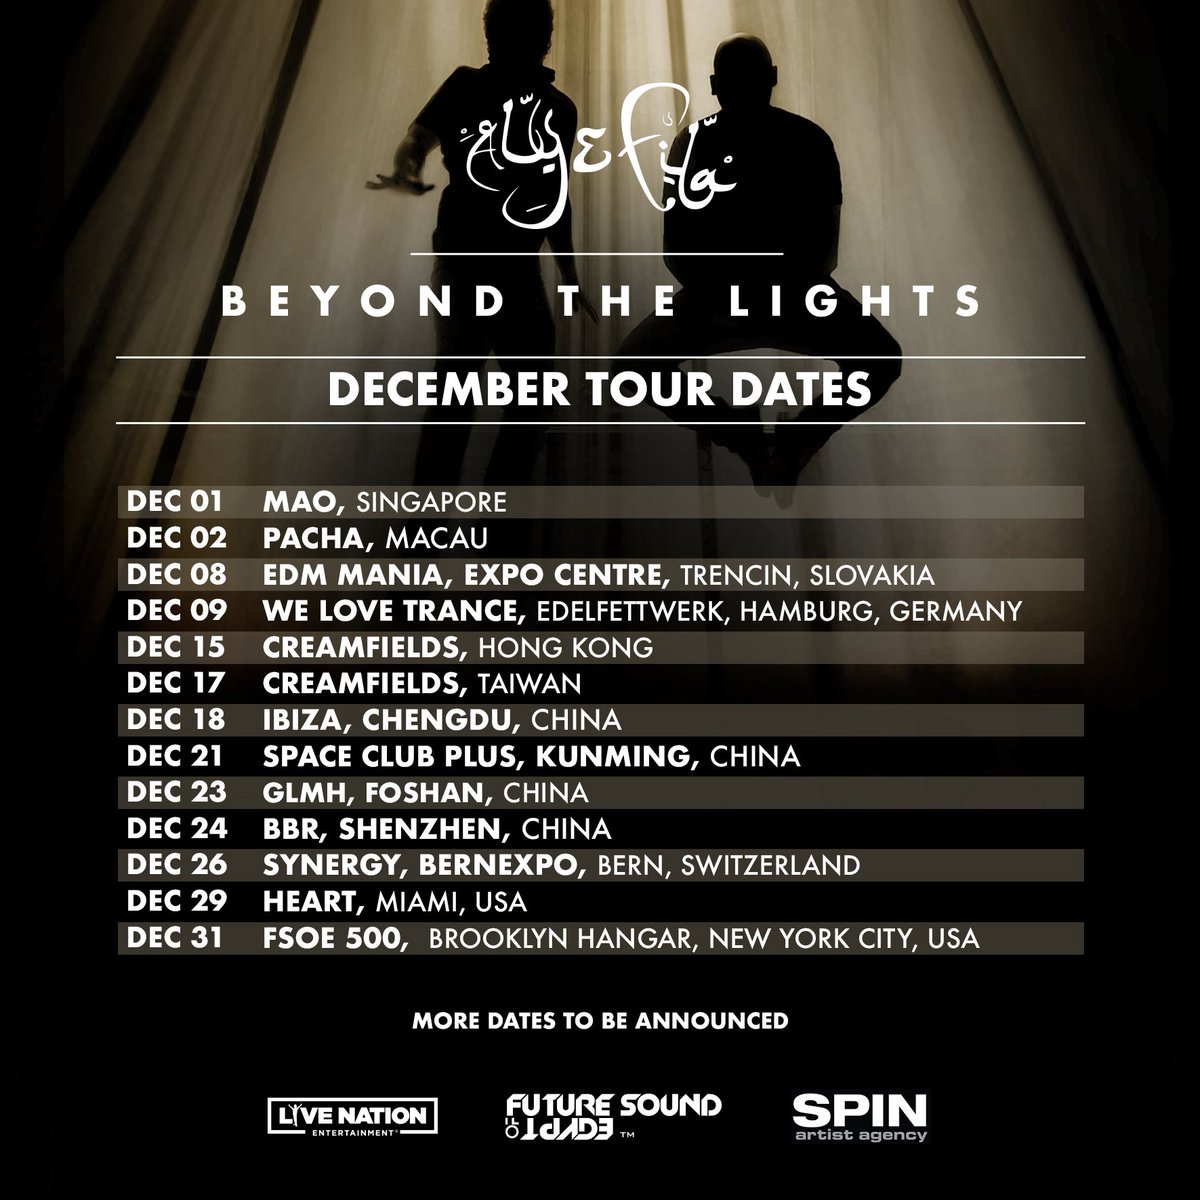 Where will we see you this December? ❤️ #BeyondTheLights https://t.co/rcVb1MUfGD